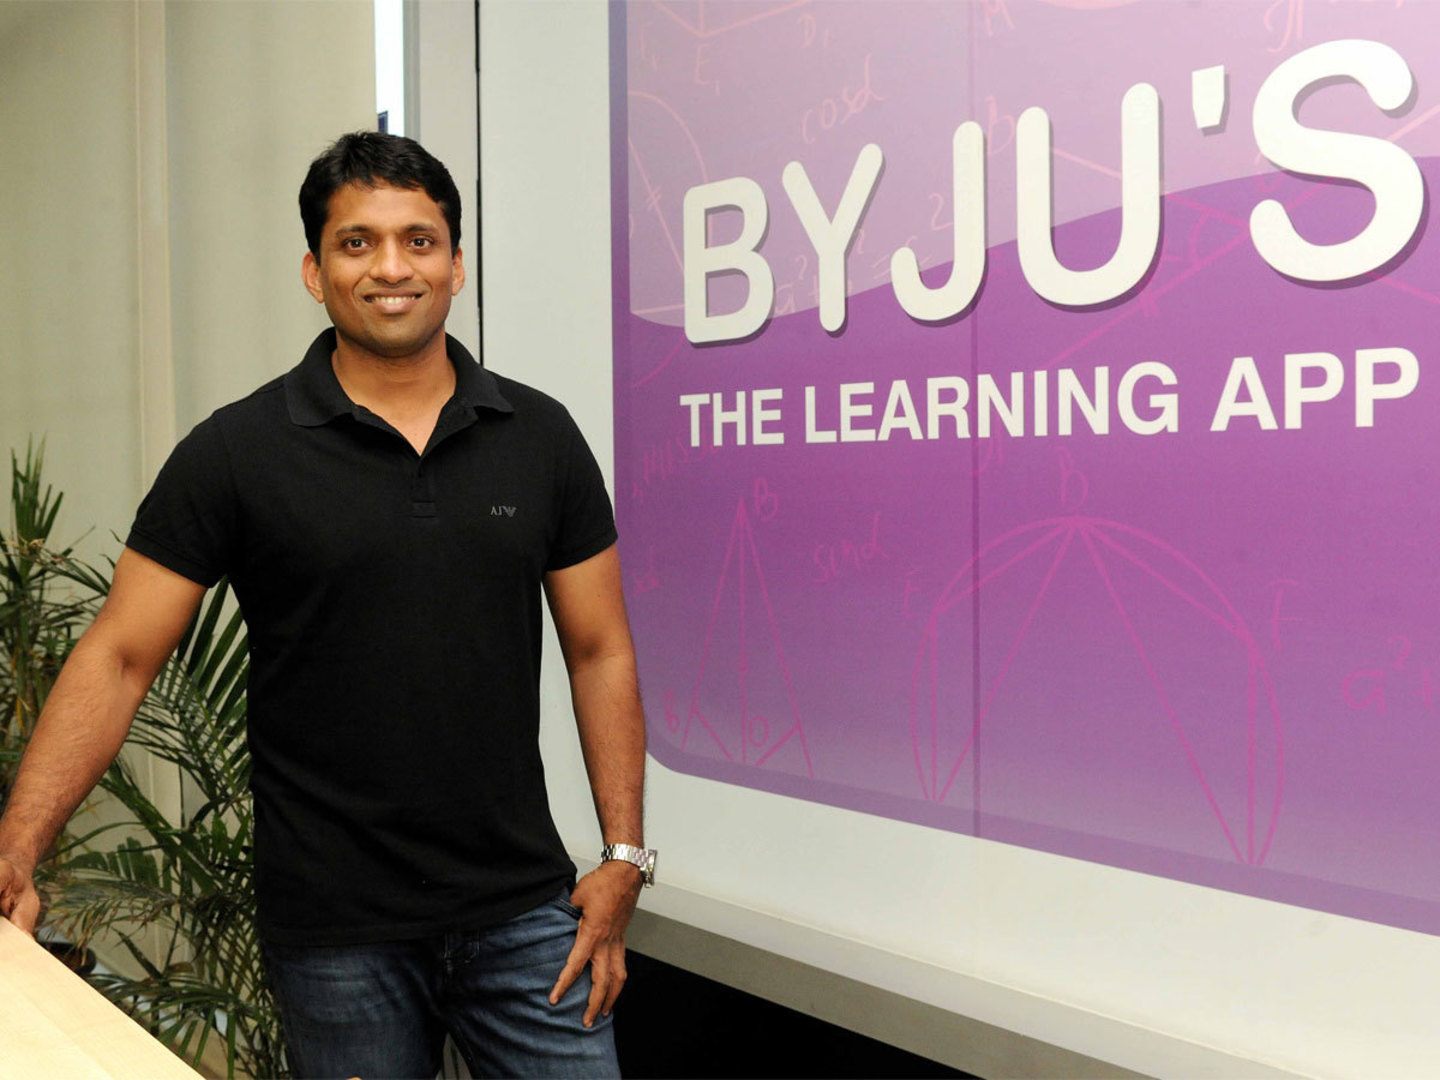 learnt english by listening to cricket football commentaries on radio byju raveendran